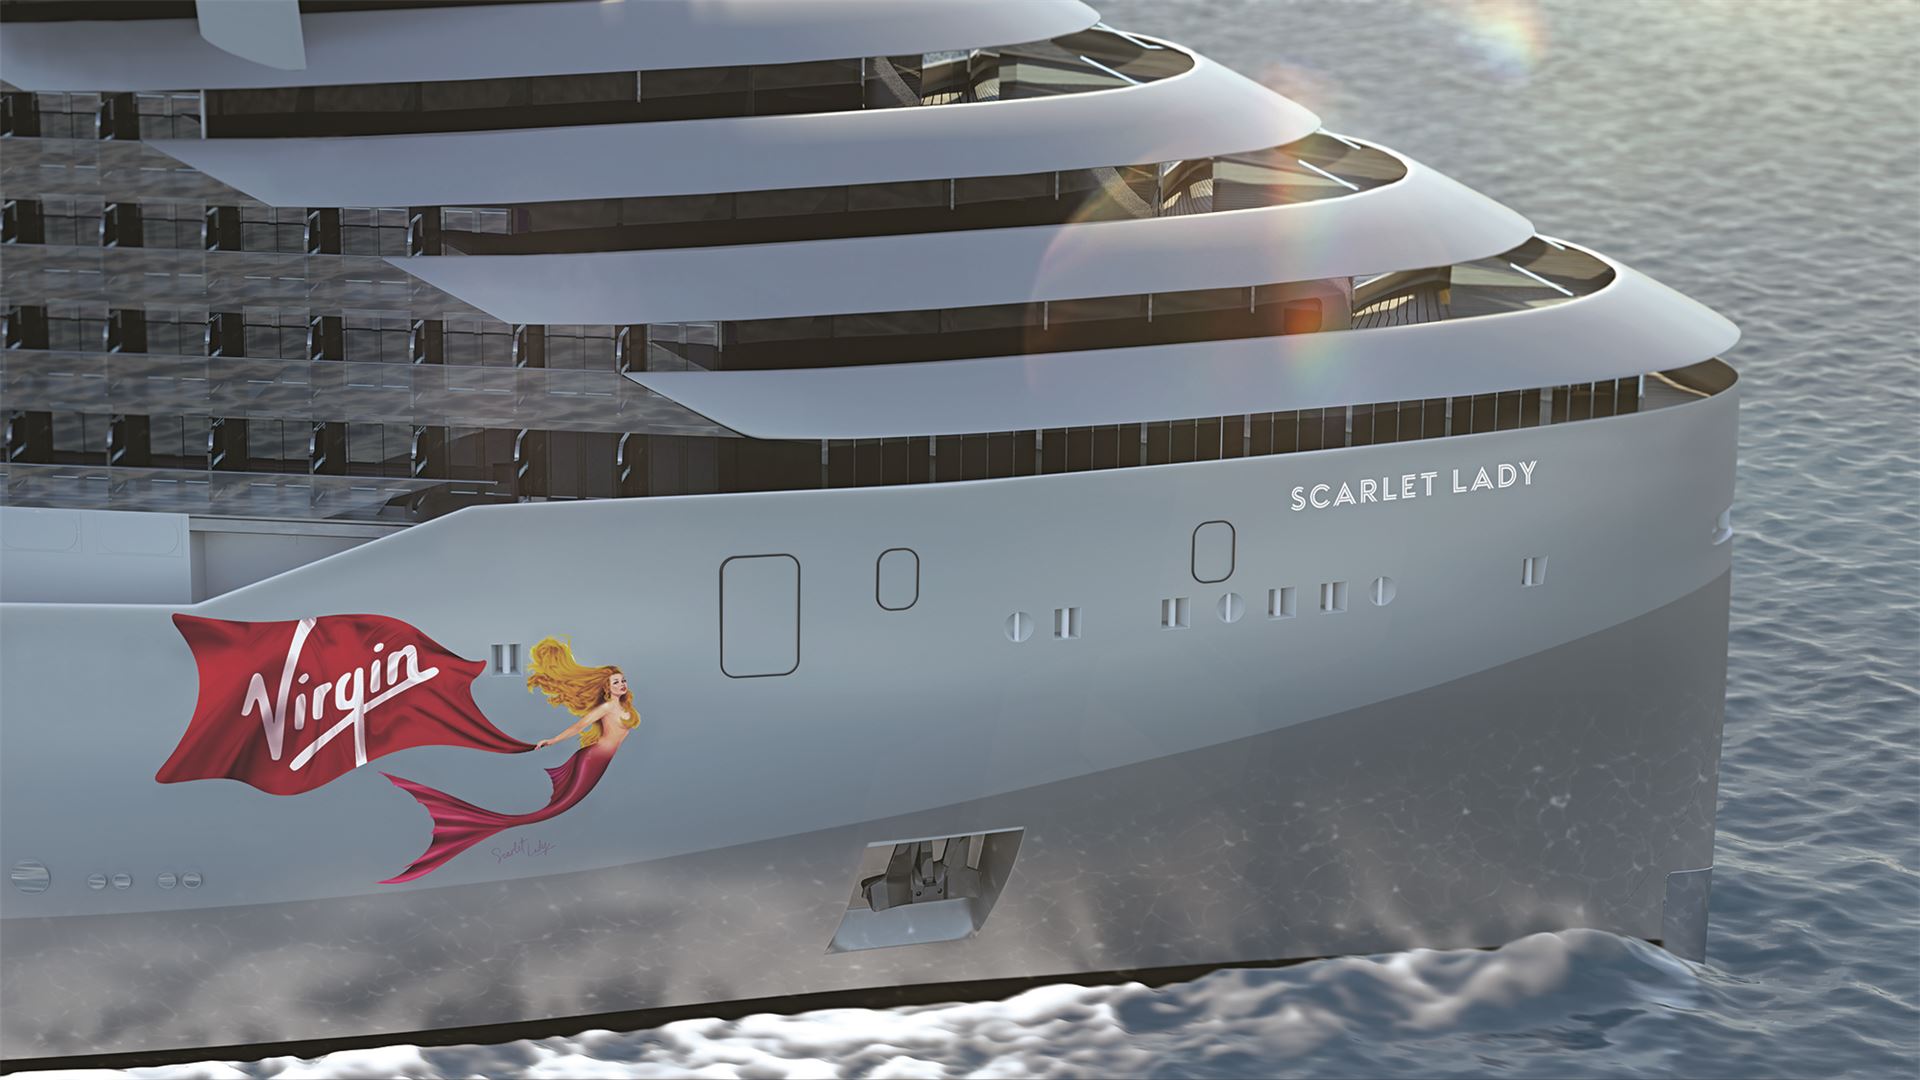 Virgin Voyages First Ship Scarlet Lady To Call At U K Ports Ahead Of 